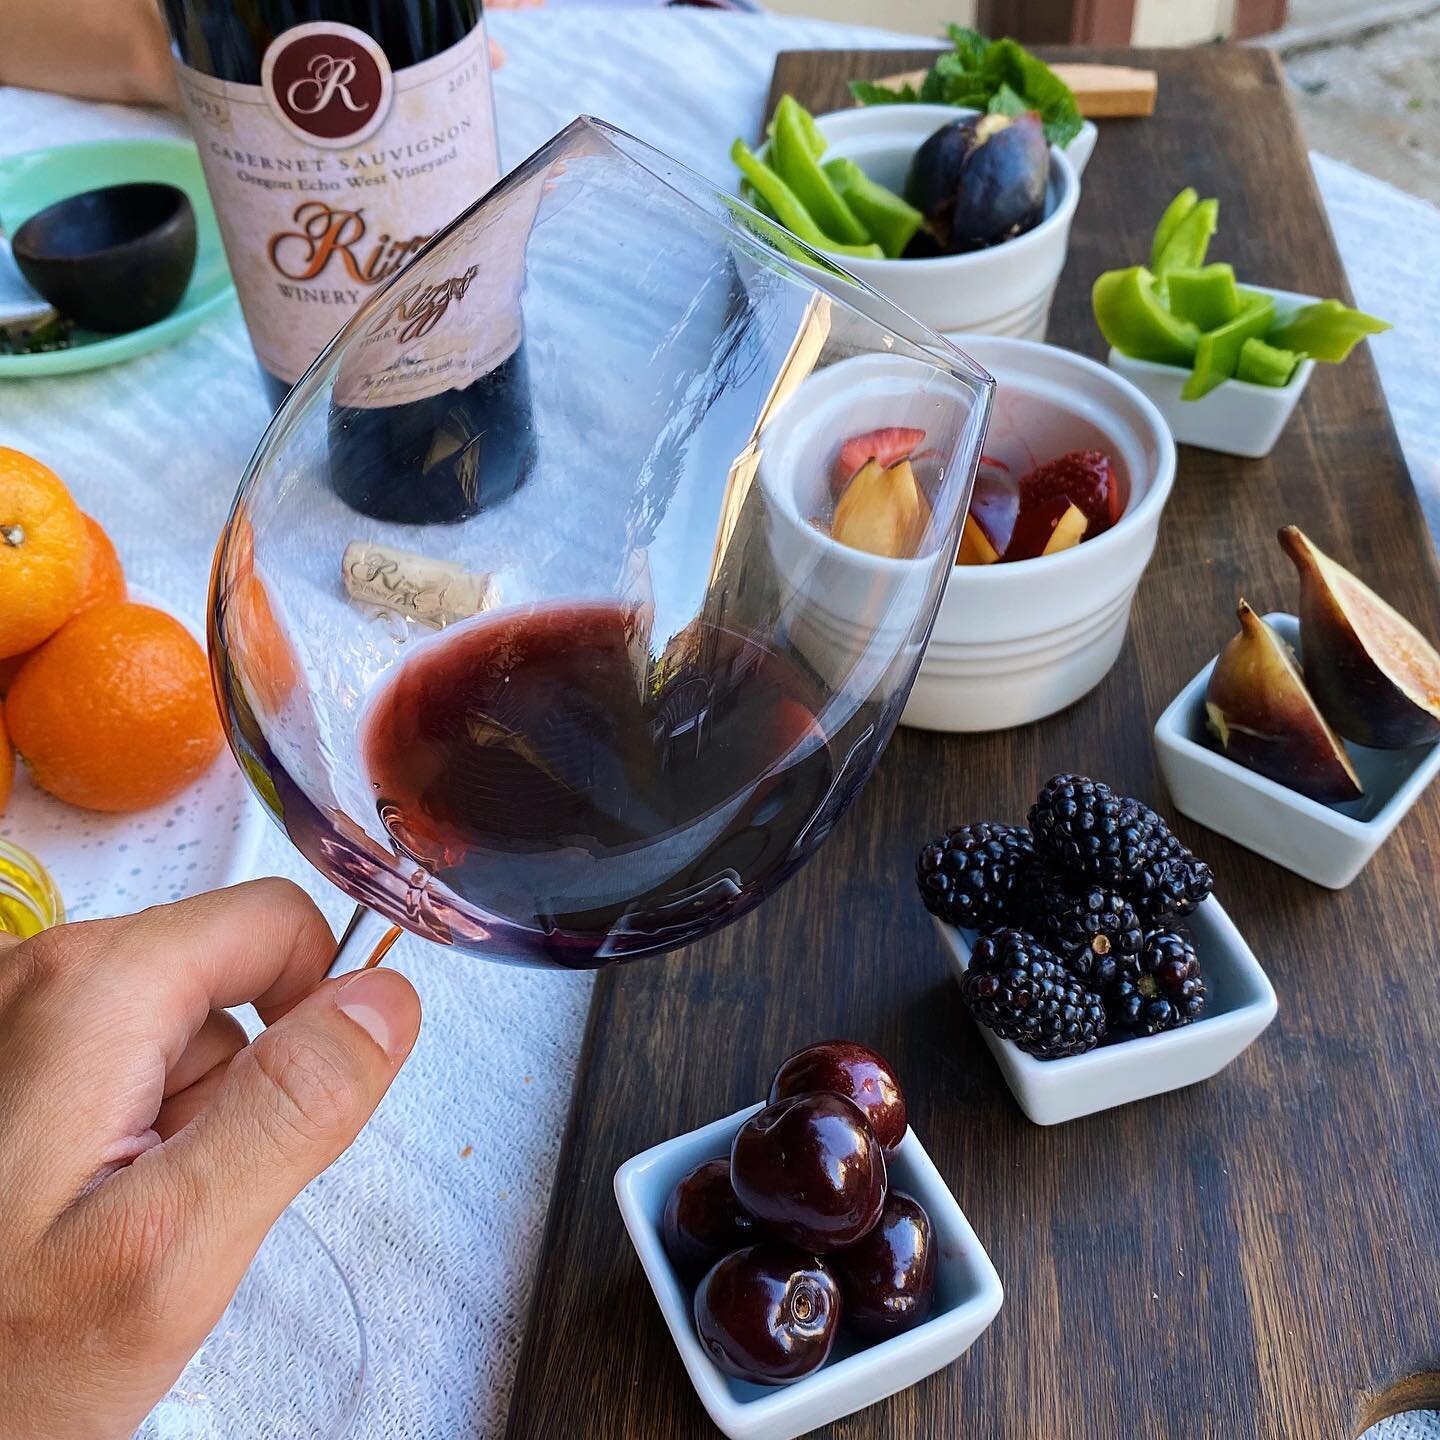 One of the beauties of wine is all the little flavors that can be found swirling around your glass. At Rizzo we aim to help you identify those flavors &amp; give you an experience you&rsquo;ll never forget 🍷

Come visit us, we&rsquo;ll be open this 